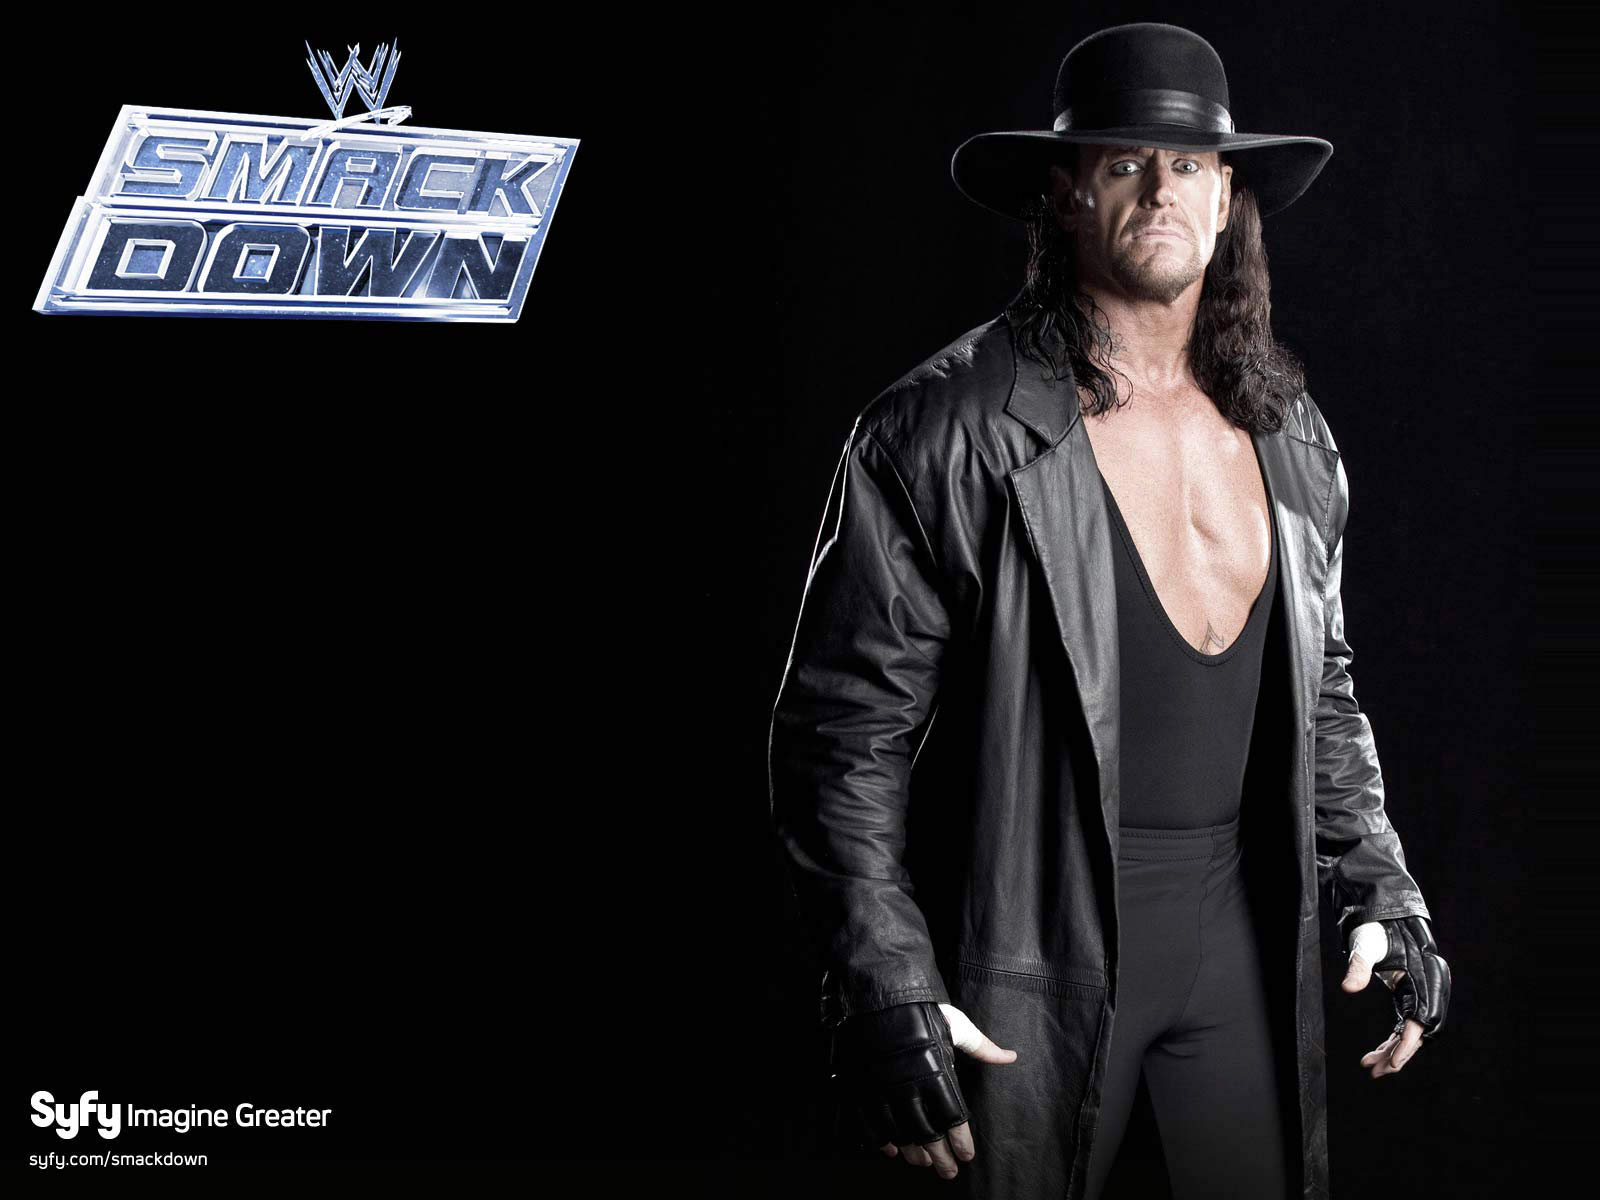 Wwe Smackdown Image HD Wallpaper And